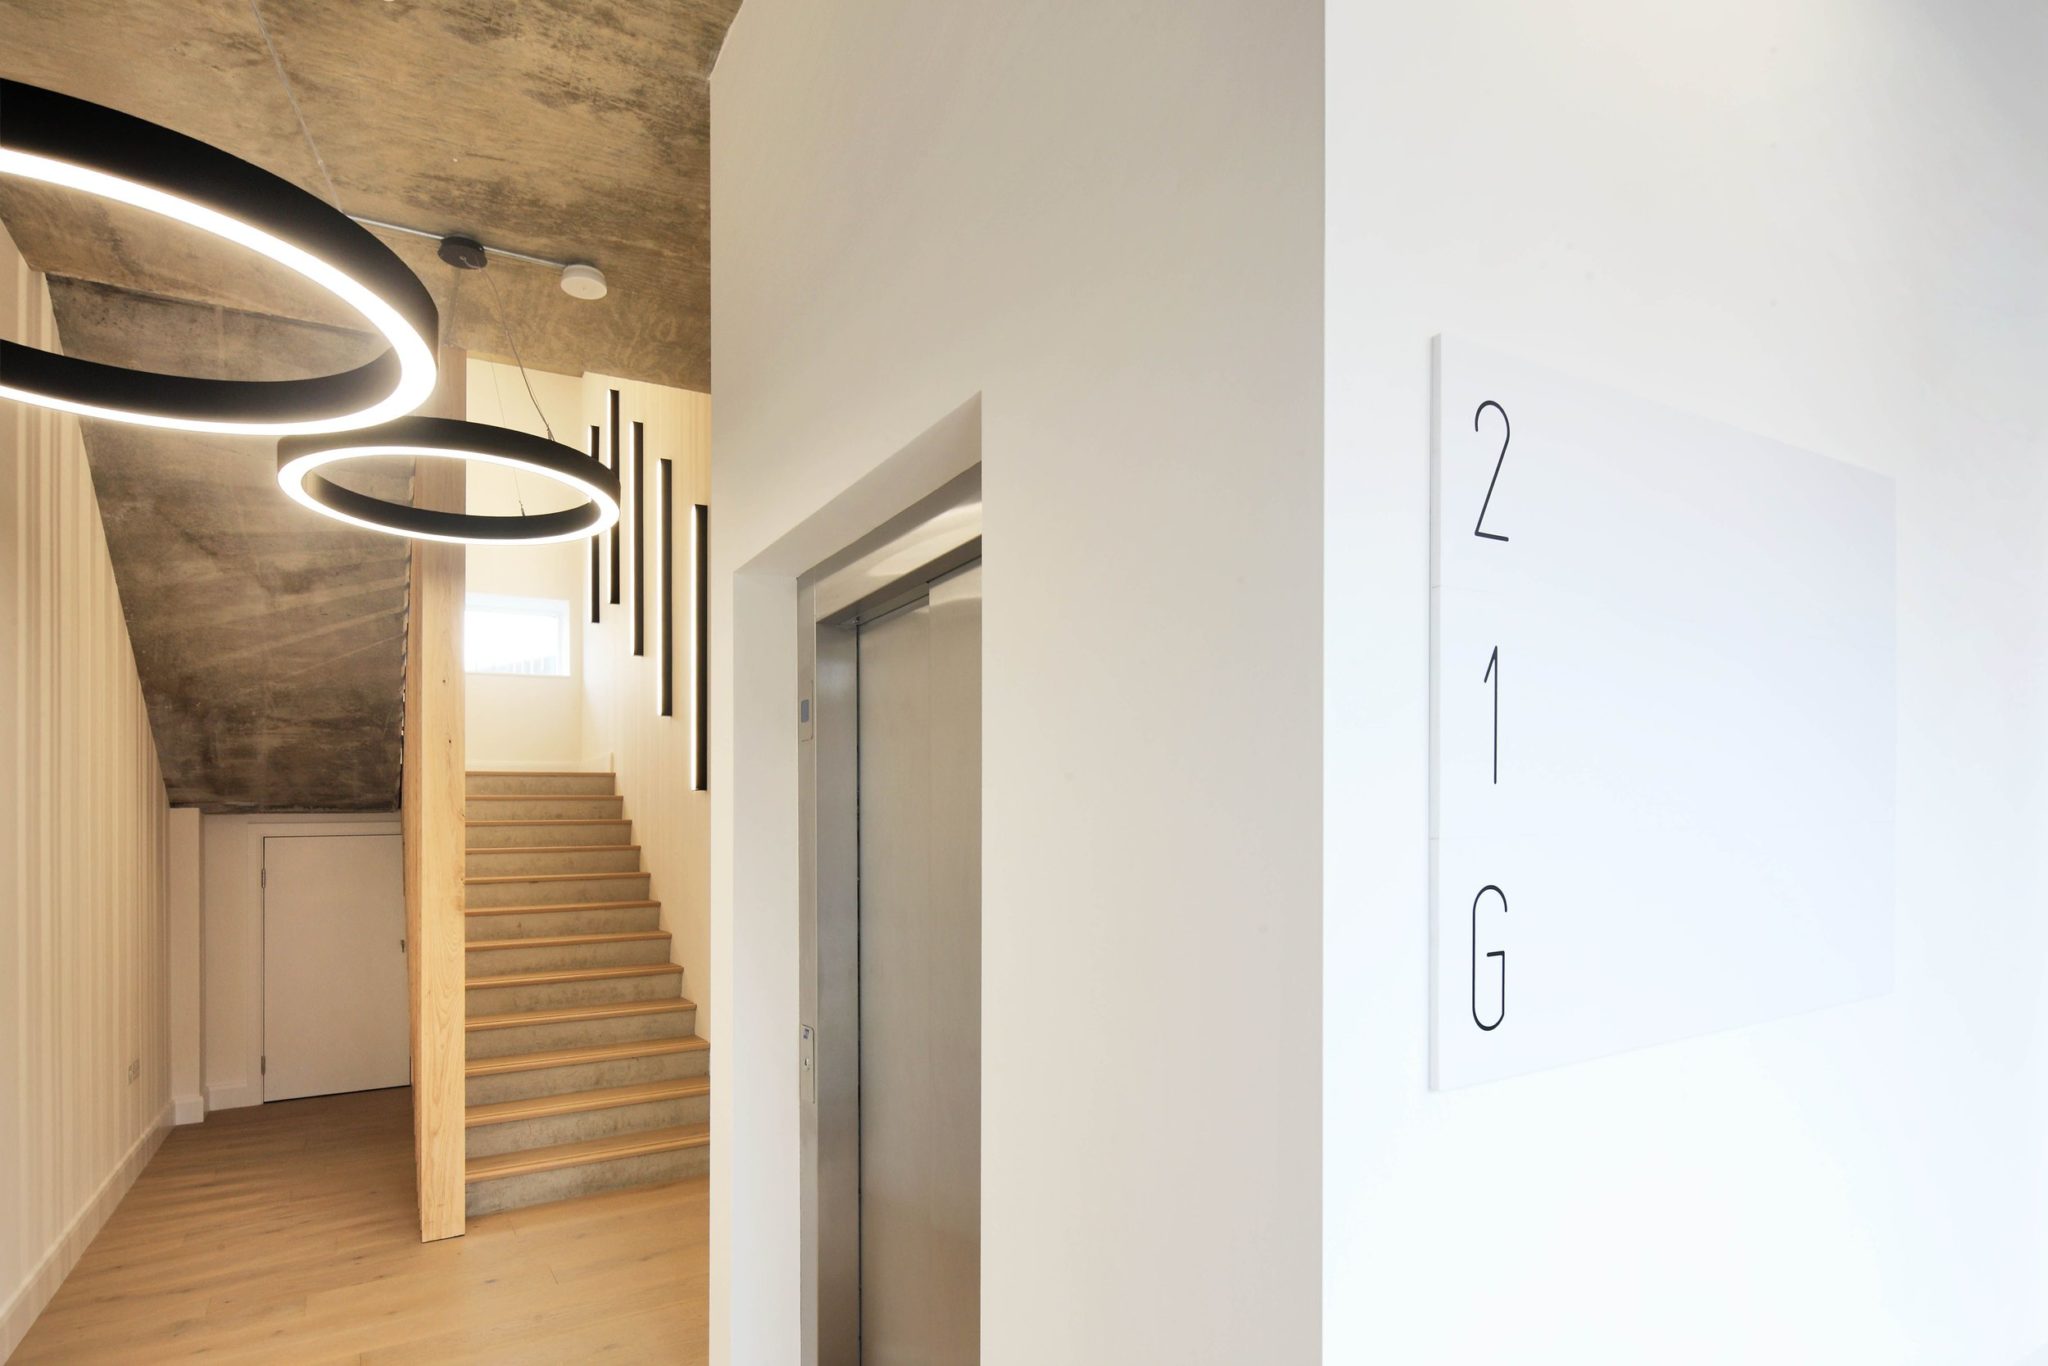 Lighting design for CAT A mixed use development at 10 Bard Road, London.